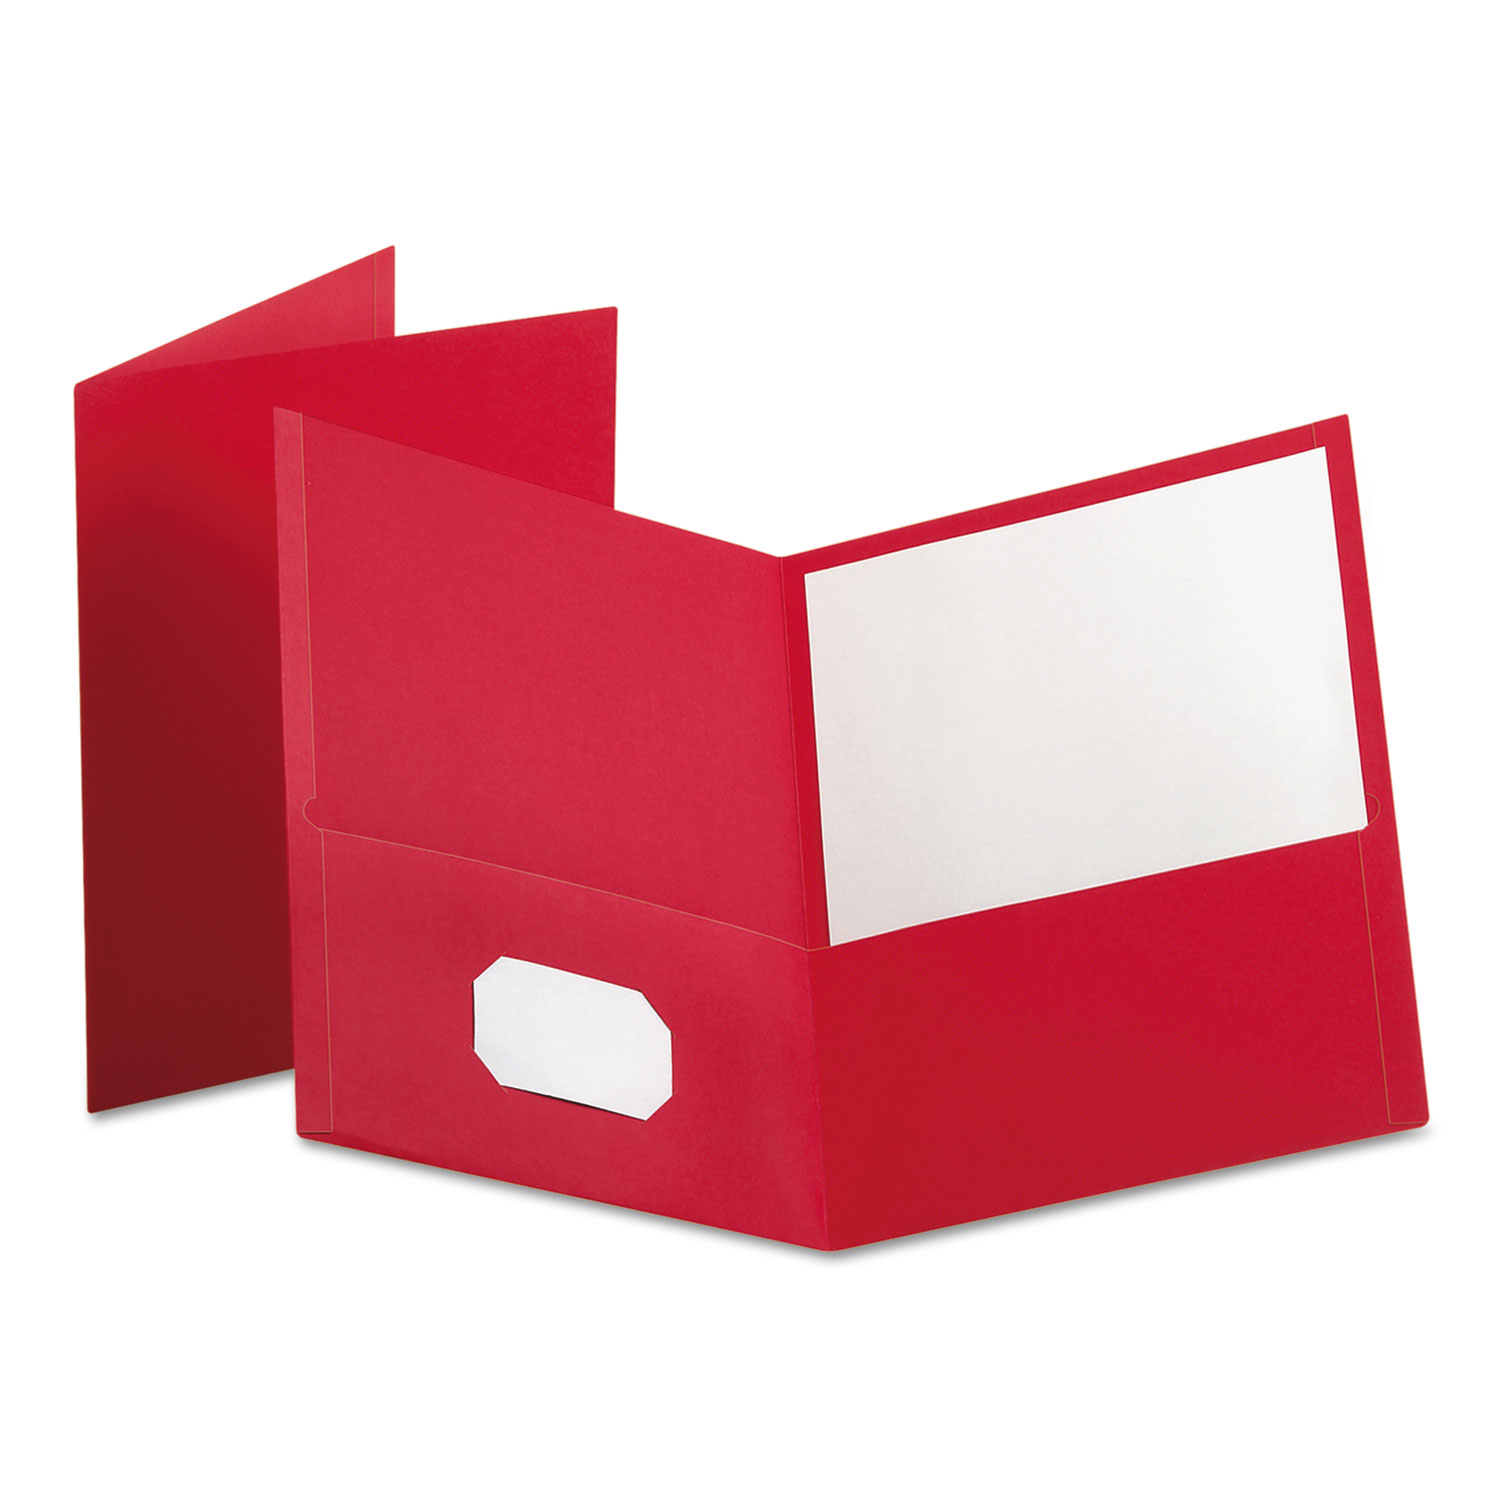 Red 2 Pack Holds 100 Sheets 57511EE Textured Paper Letter Size Oxford Twin-Pocket Folders Box of 25 